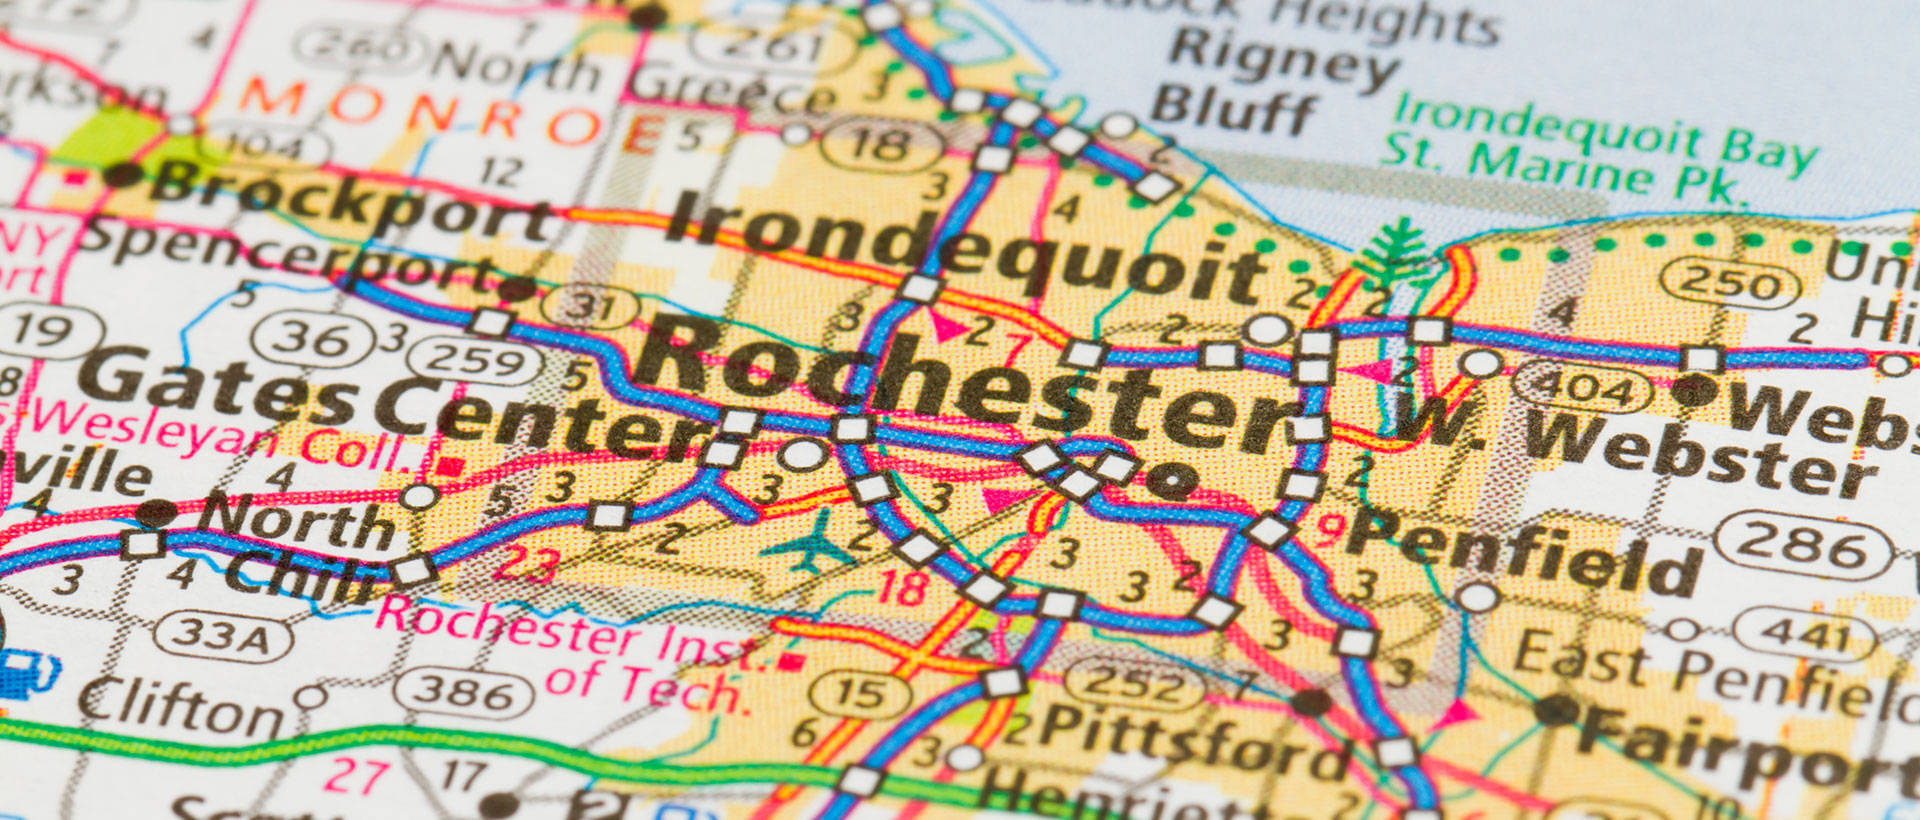 Map of Rochester NY